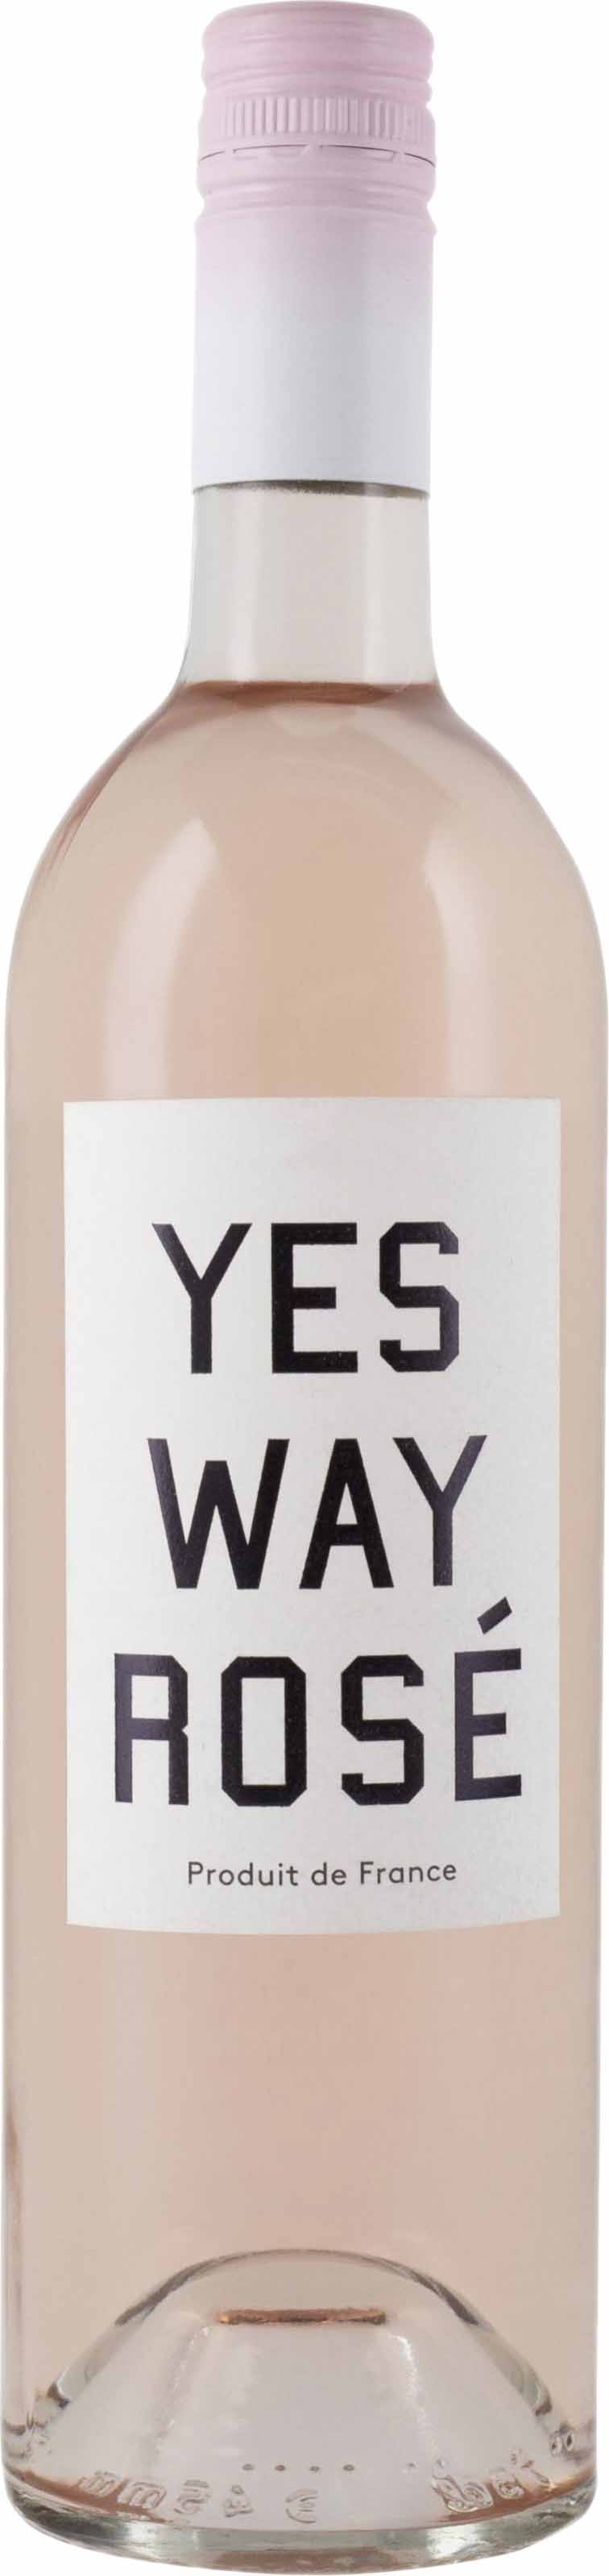 Yes Way Rose Wine - France